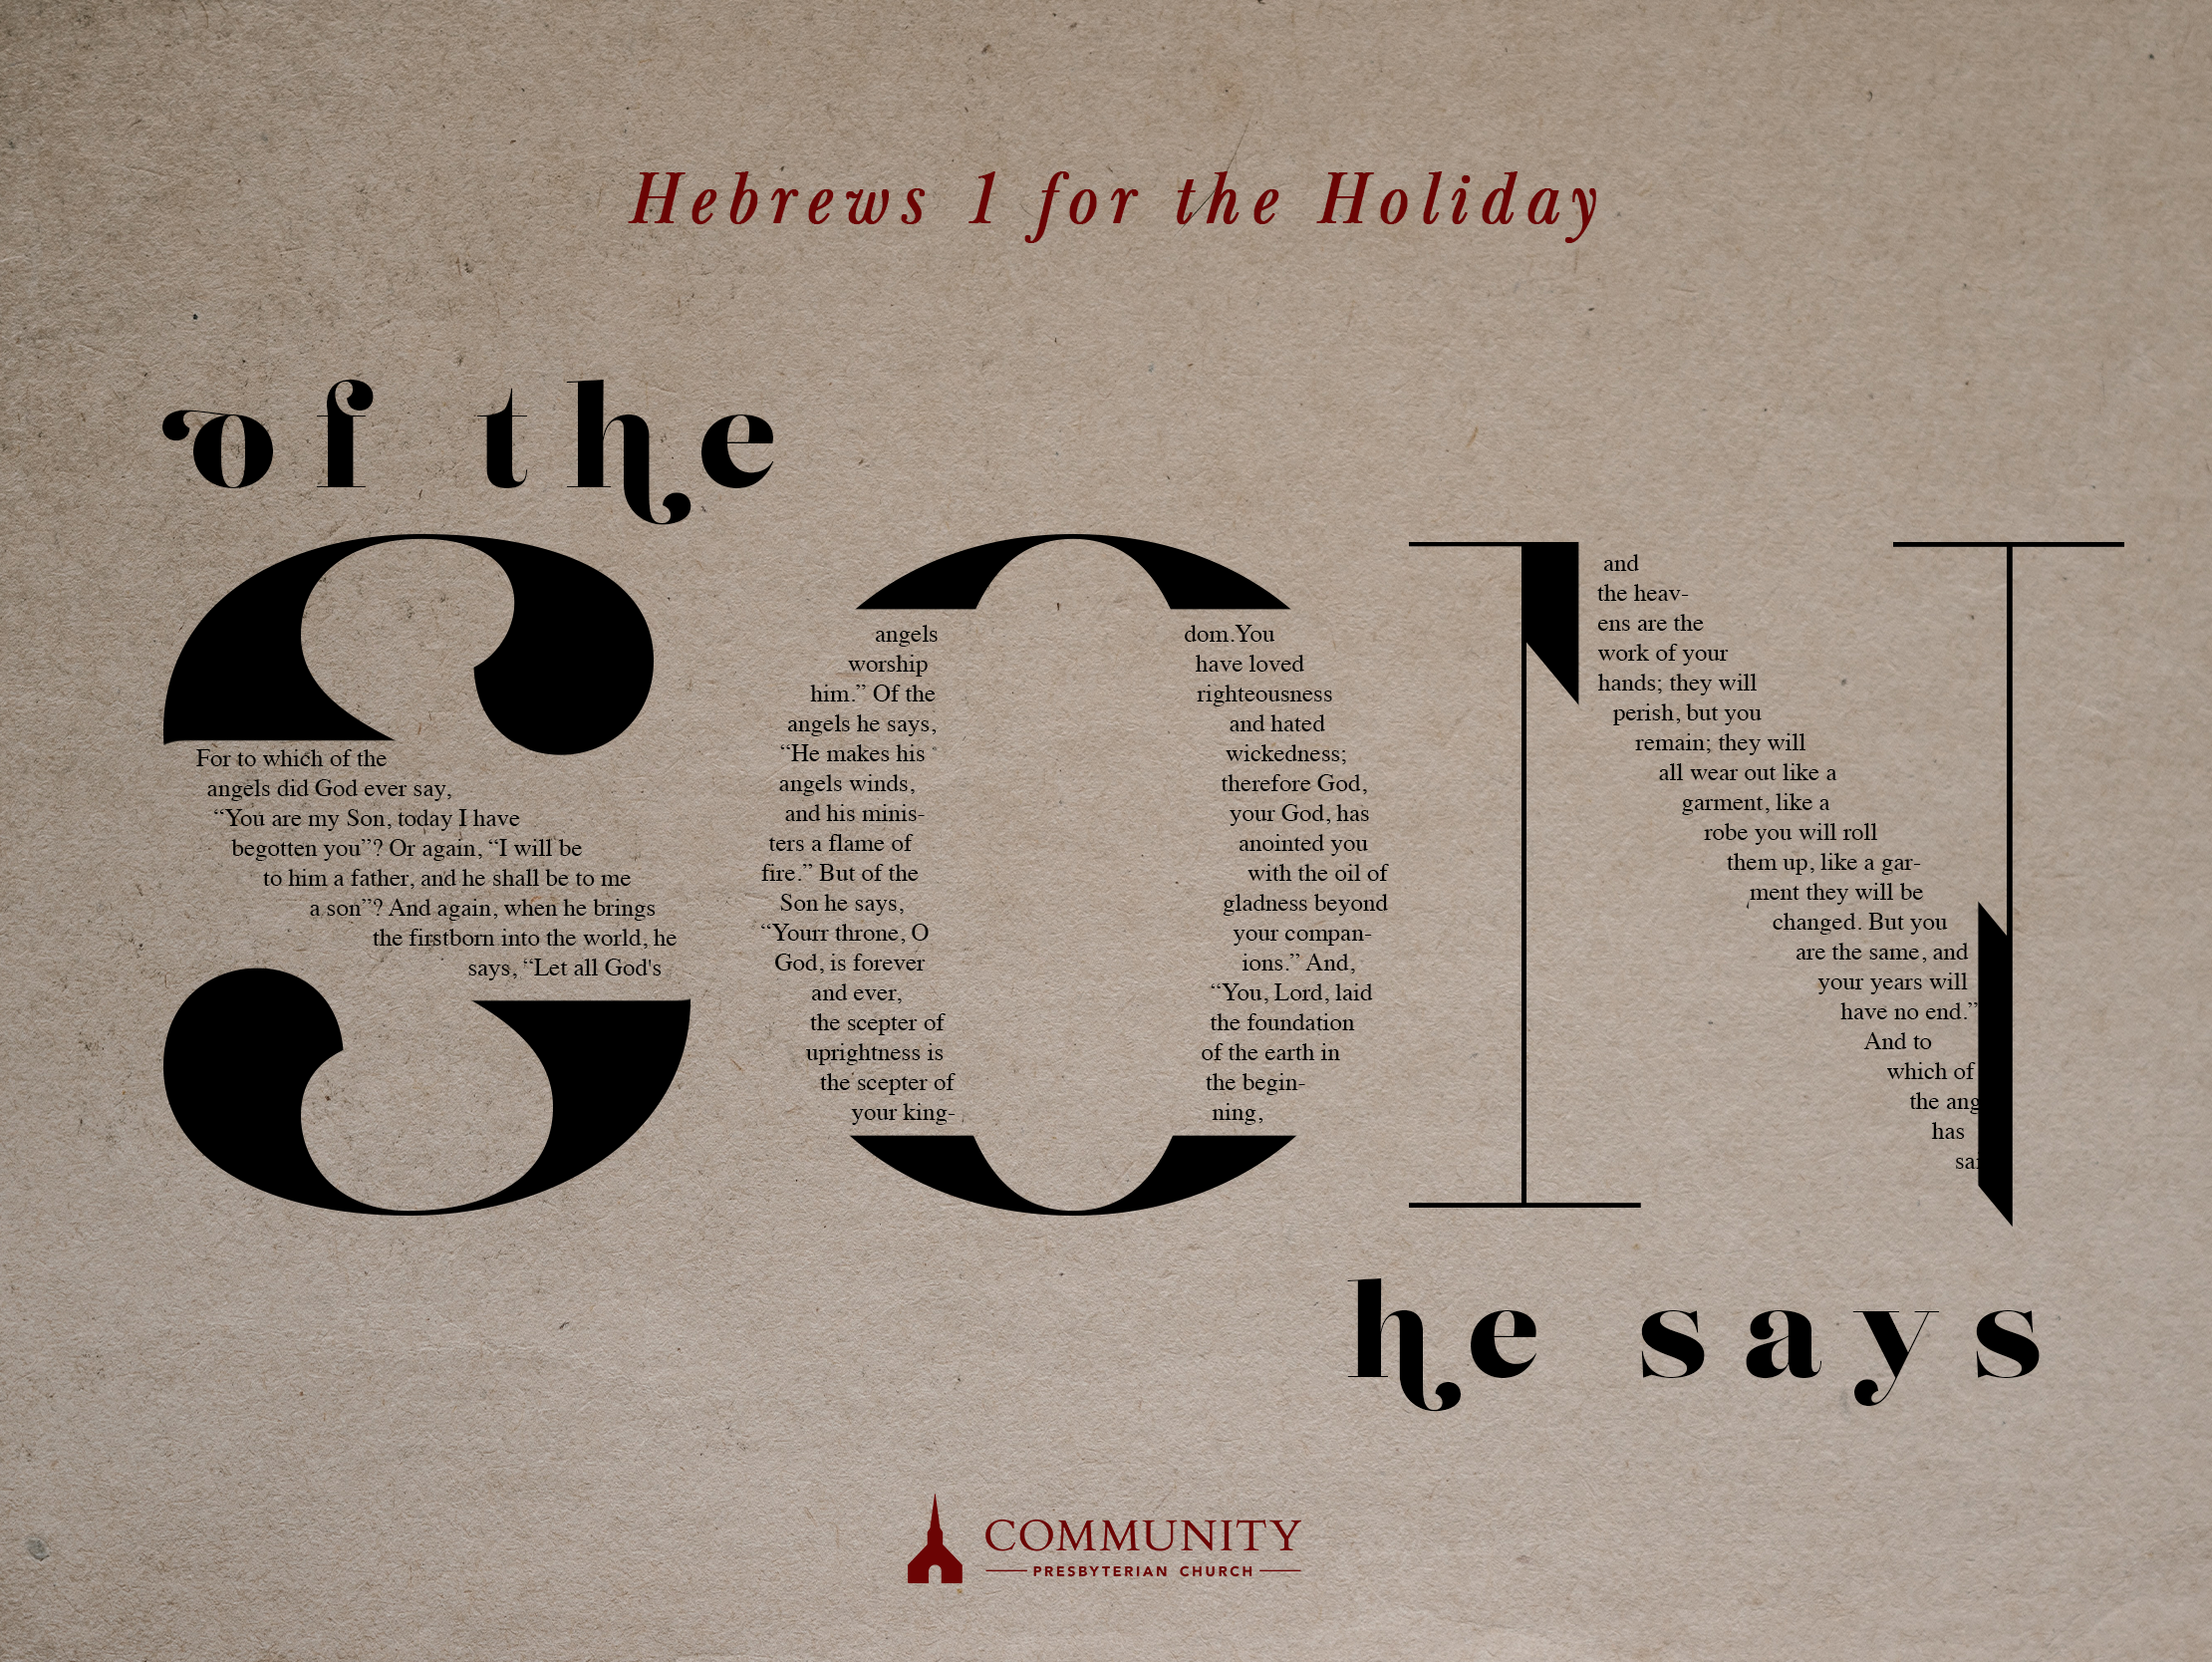 Hebrews for the Holidays, Of The Son He Says